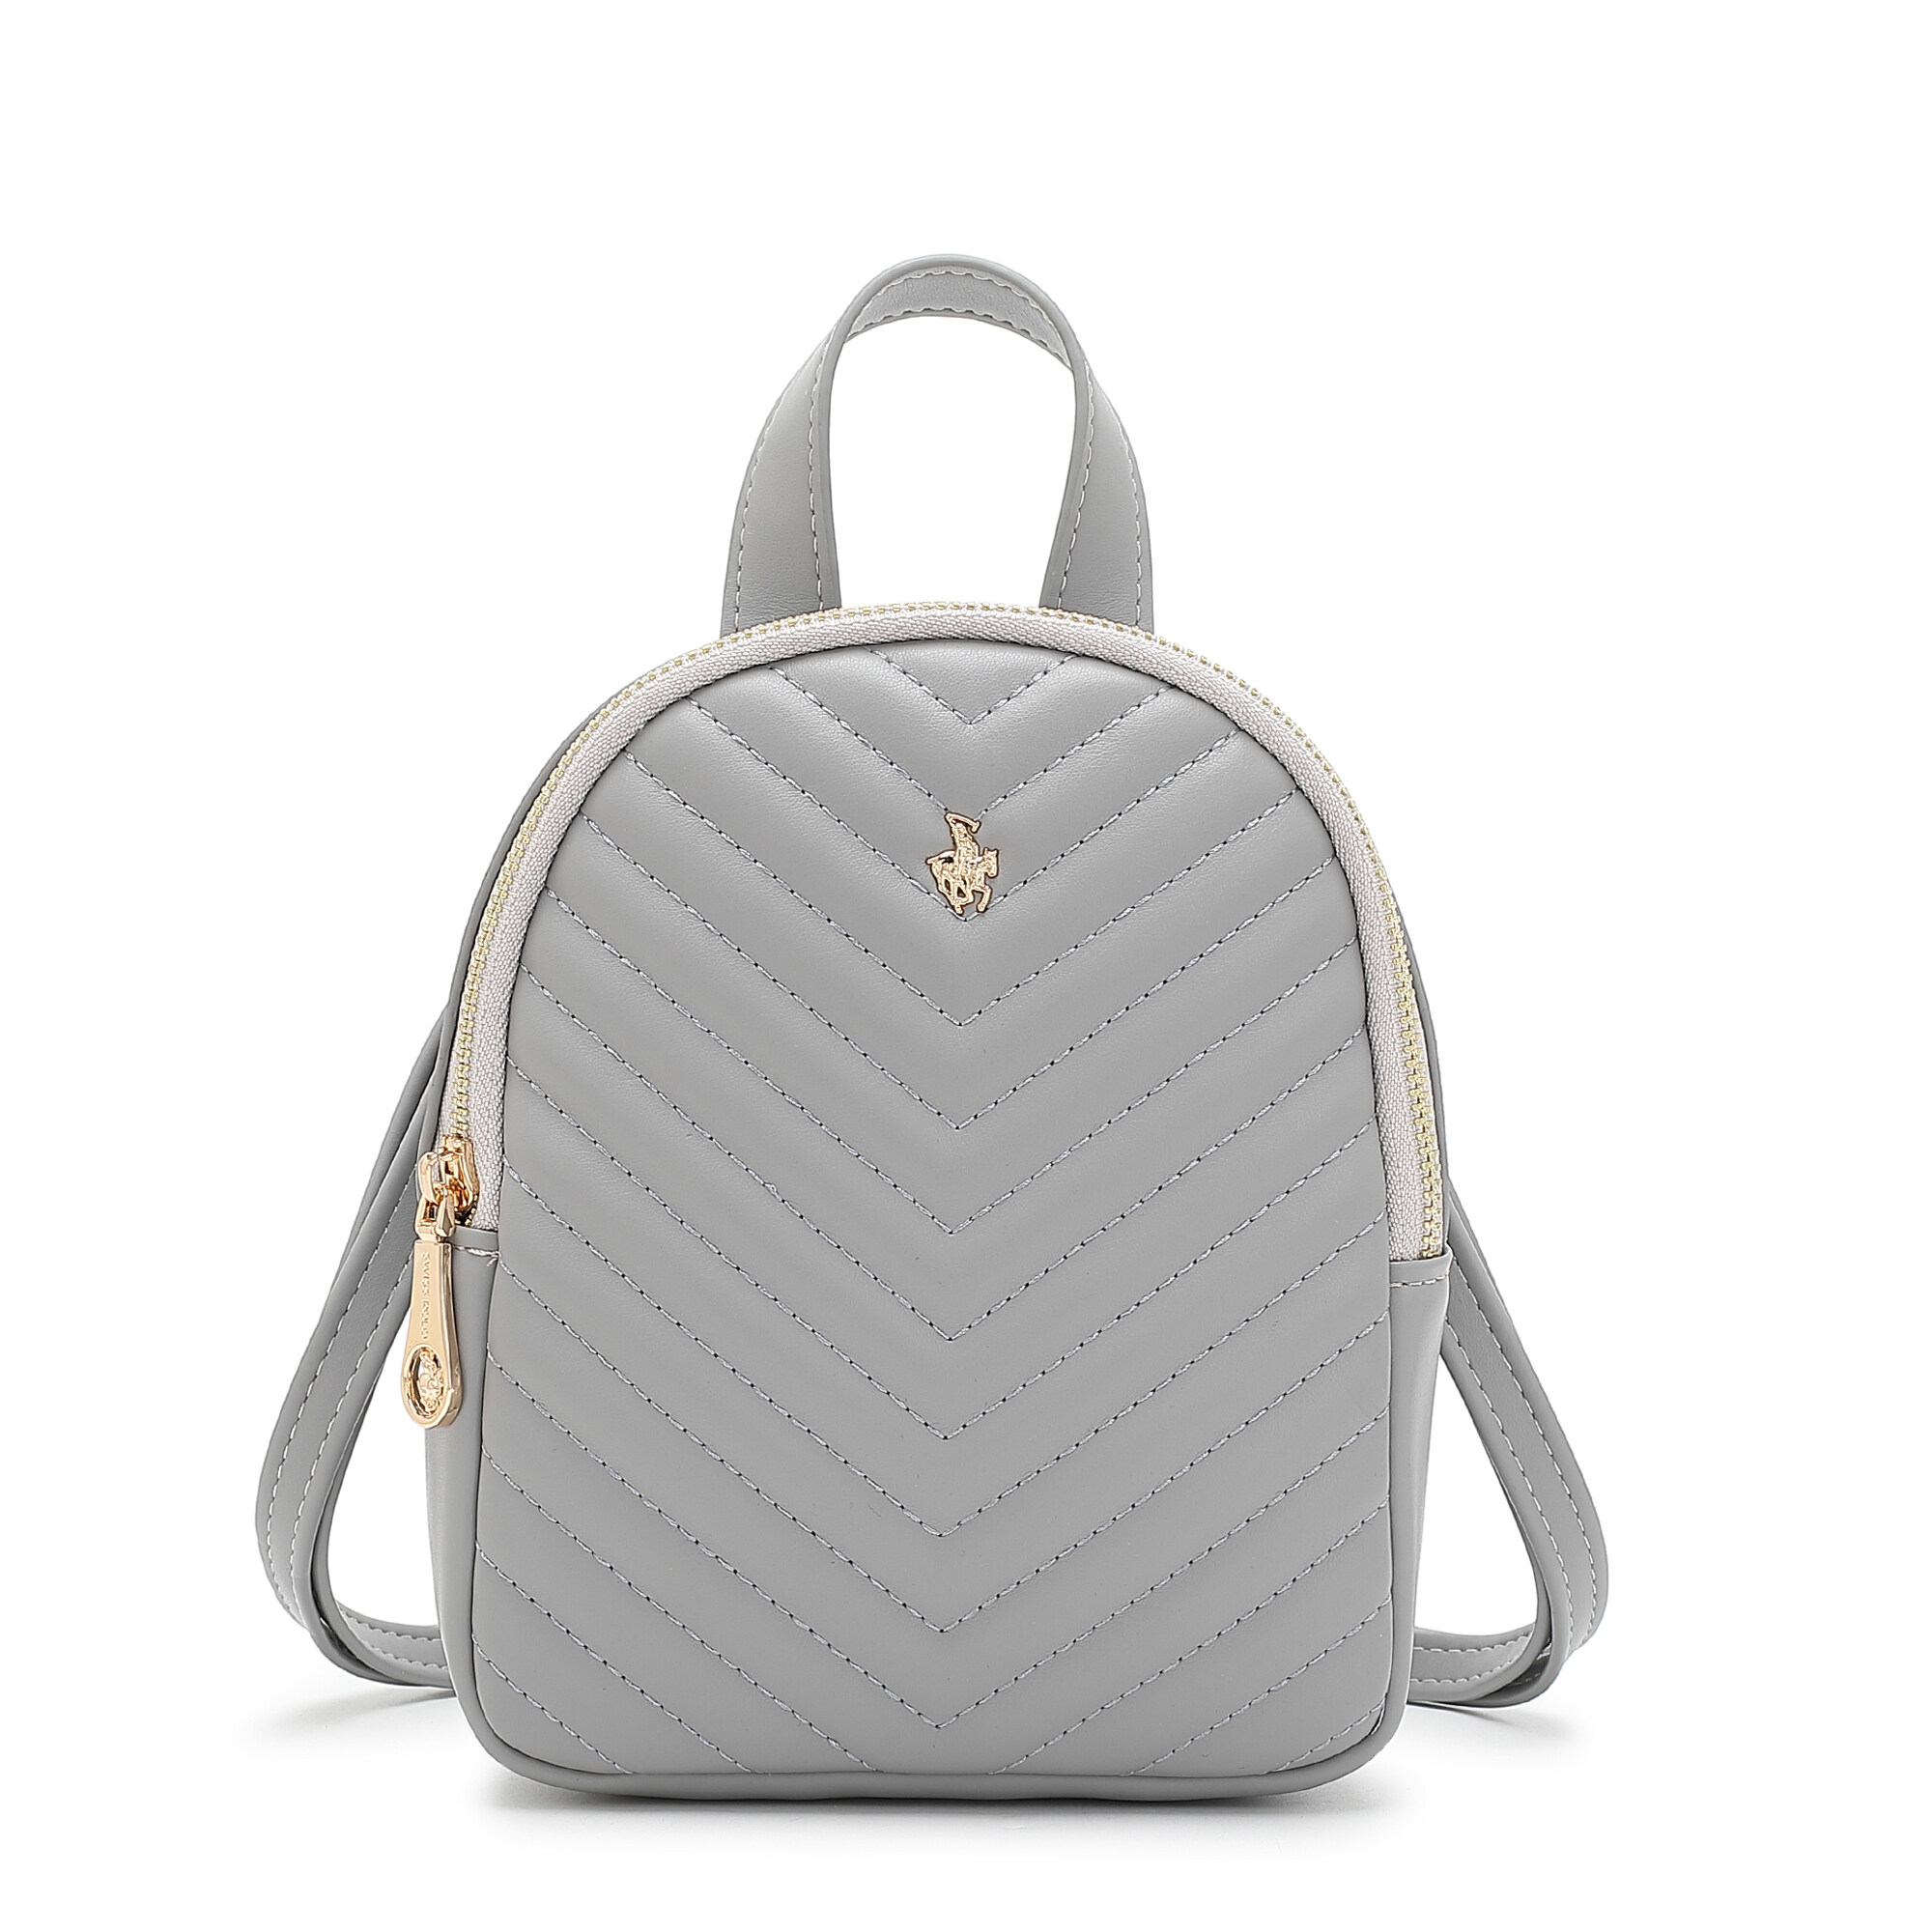 SWISS POLO Ladies Quilted Mini Backpack HJL 810-4 GREY